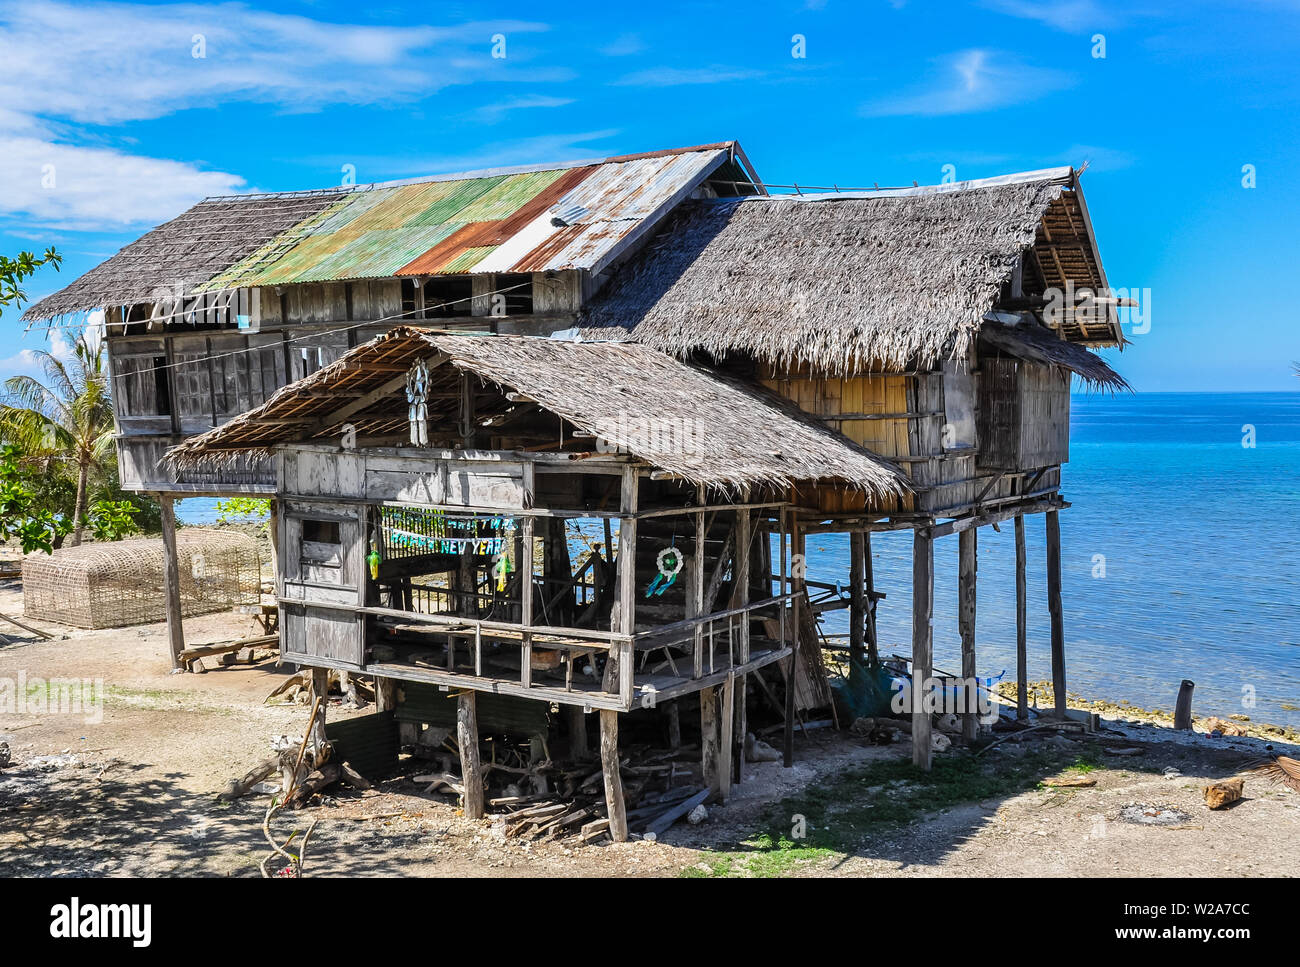 Old, almost dilapidated house made of native building materials - Siquijor Island, Philippines Stock Photo